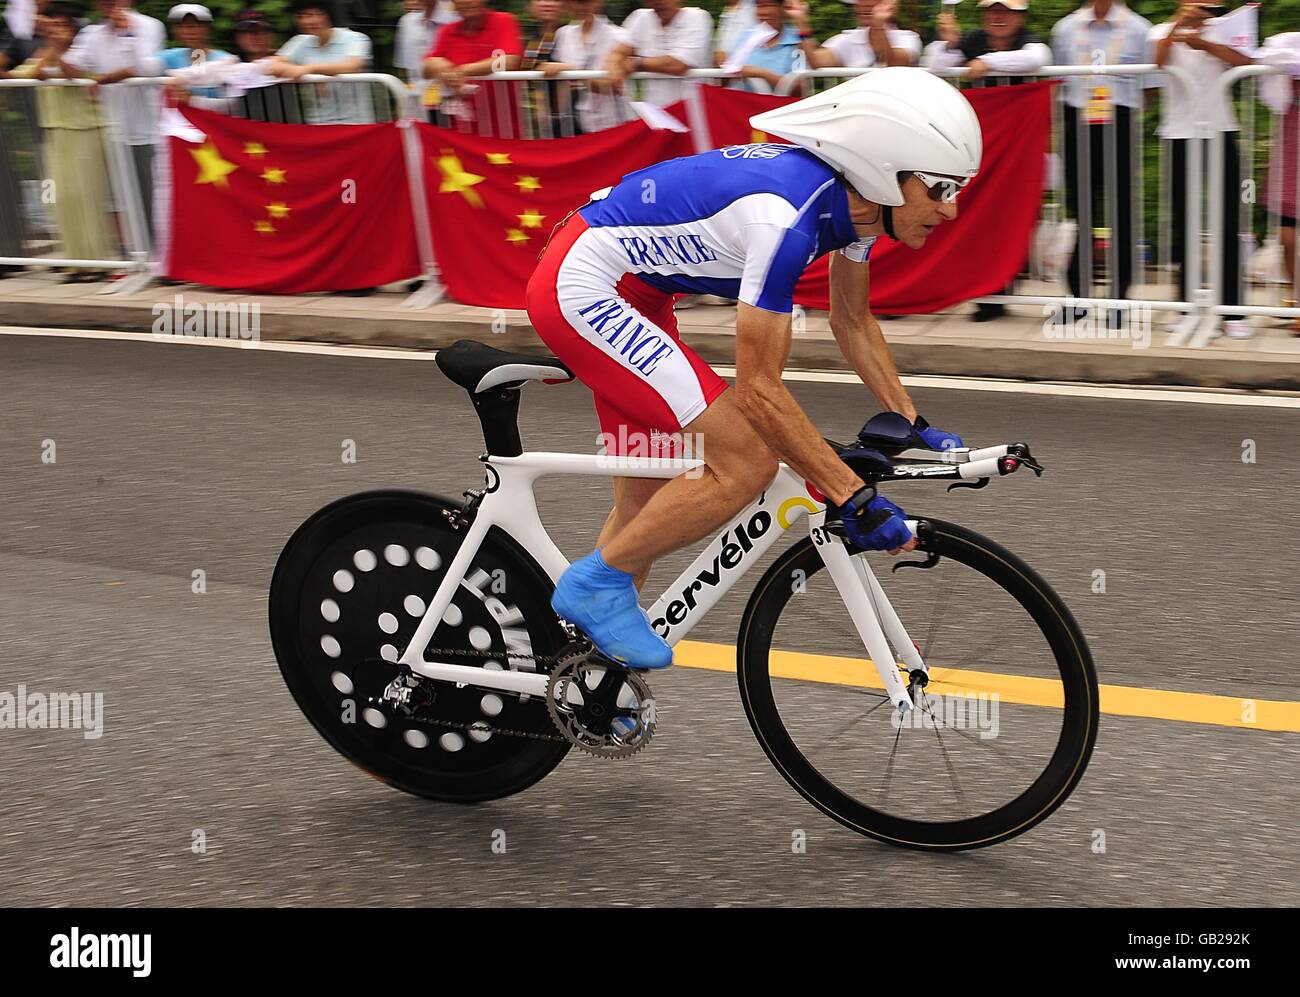 France's Jeannie Longo-Ciprelli competes in the Women's Individual Time Trial on the Cycling Road Course on Day 5 of the 2008 Olympic Games in Beijing. Stock Photo